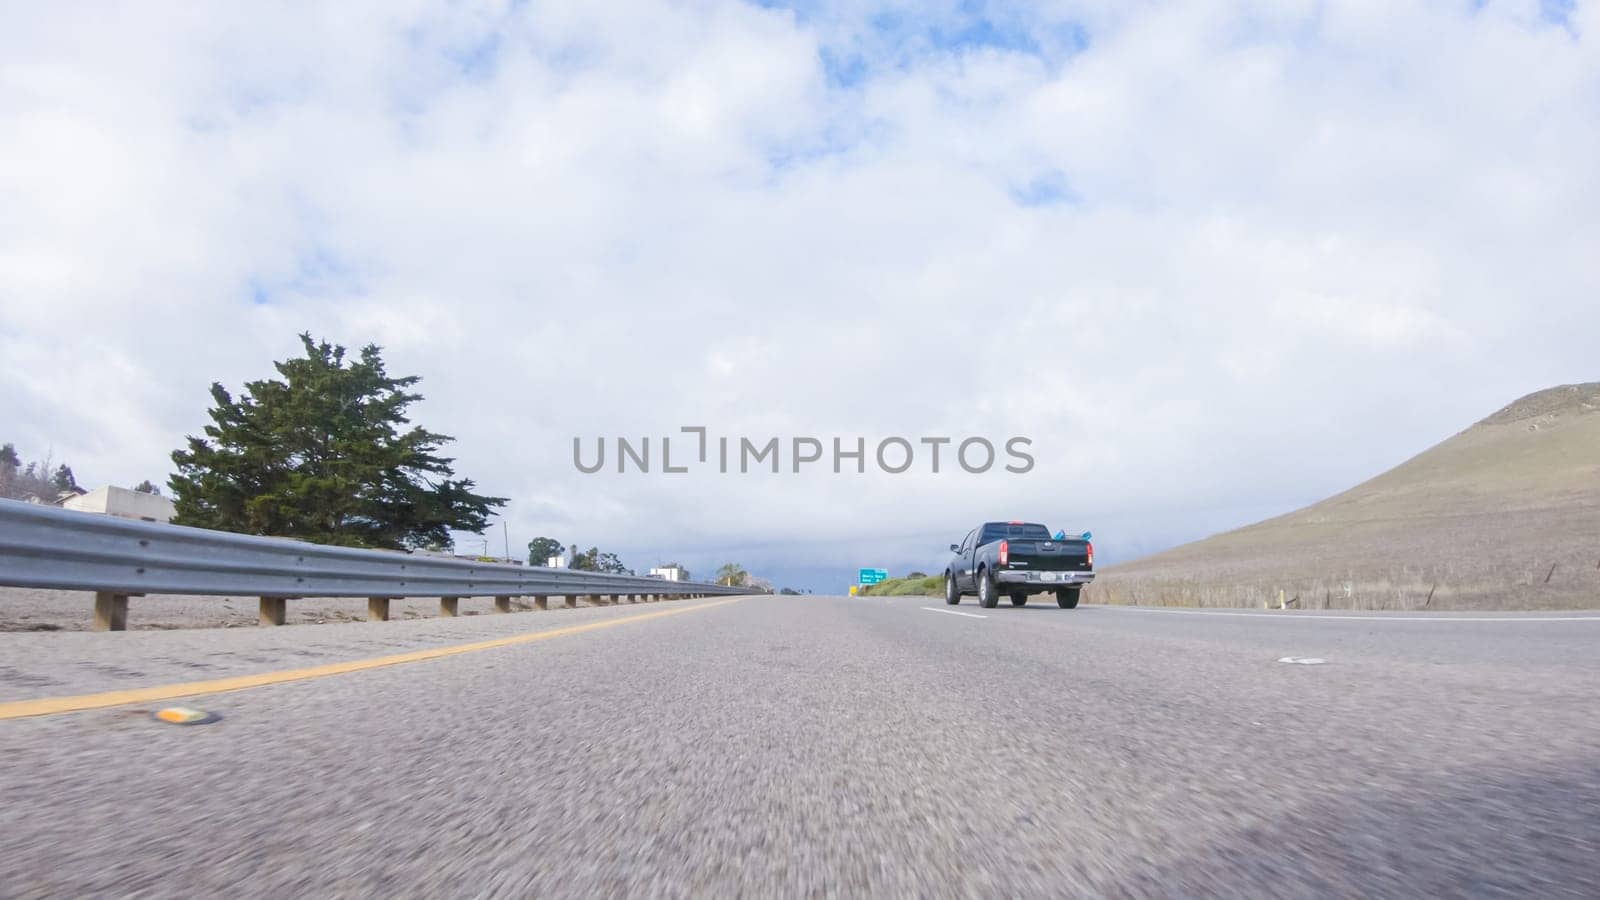 Santa Maria, California, USA-December 6, 2022-On a crisp winter day, a car cruises along the iconic Highway 101 near San Luis Obispo, California. The surrounding landscape is brownish and subdued, with rolling hills and patches of coastal vegetation flanking the winding road.